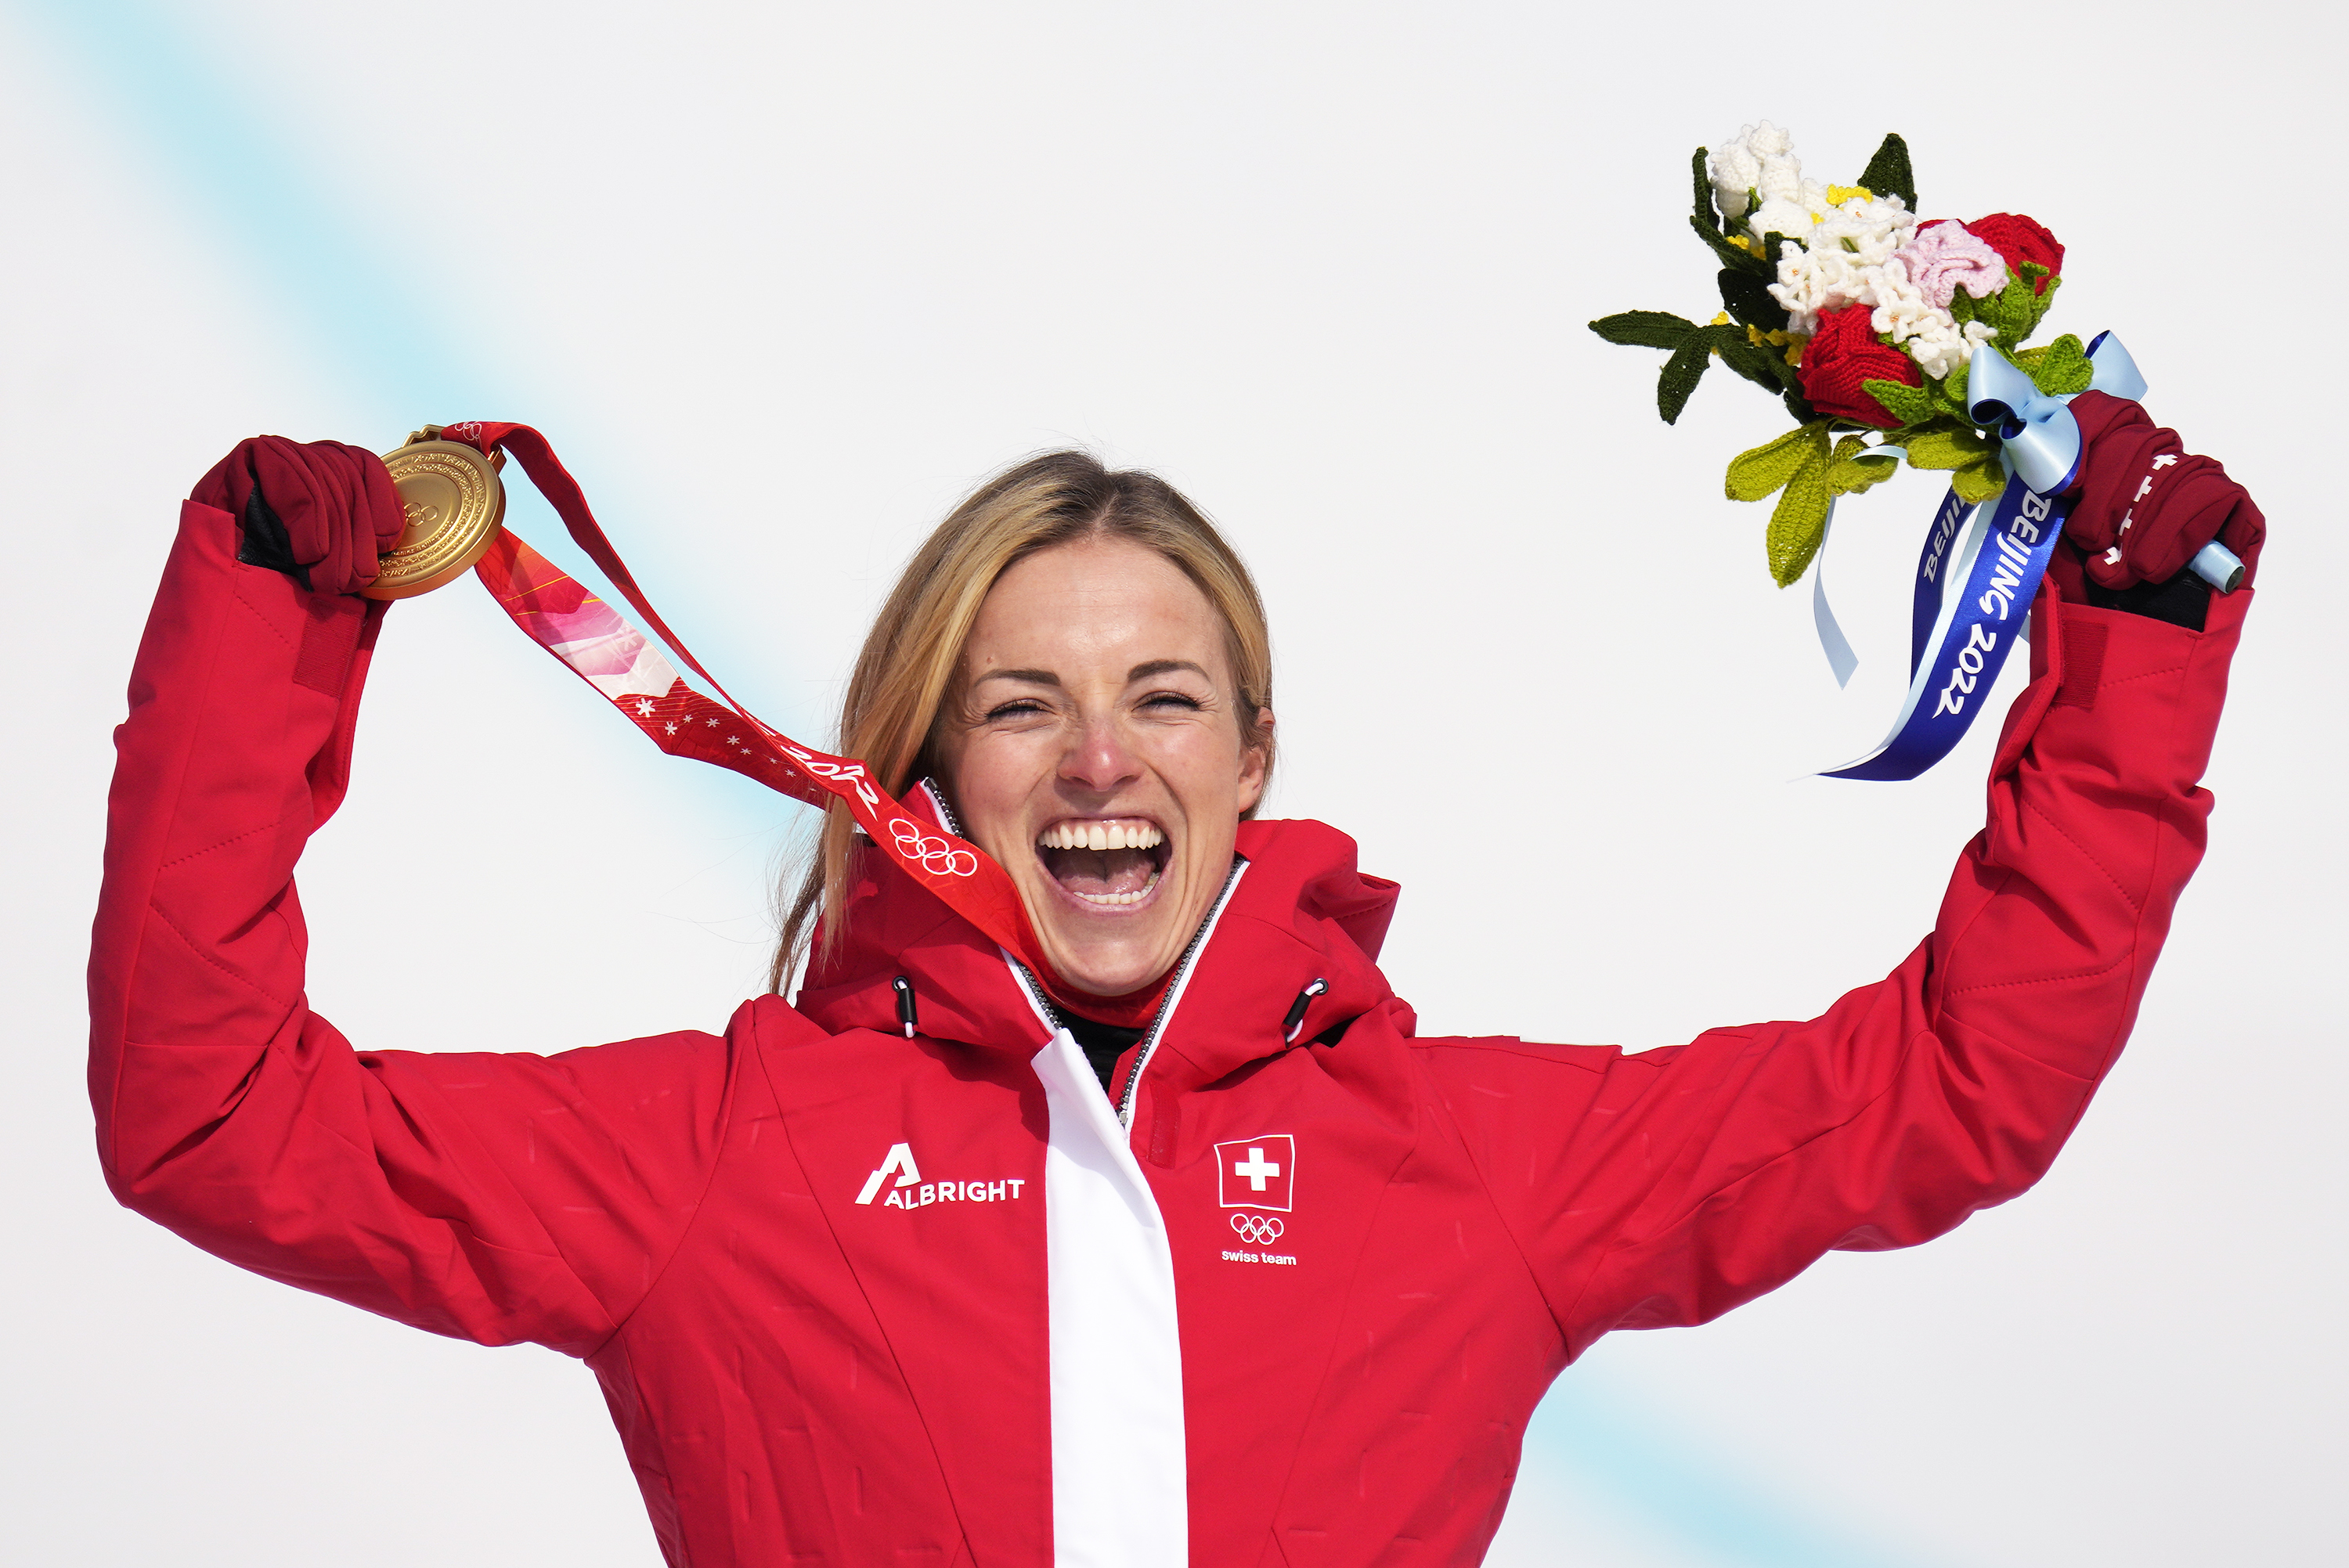 Switzerland's gold medalist Lara Gut-Behrami poses during the women's super-G medal ceremony on Friday.